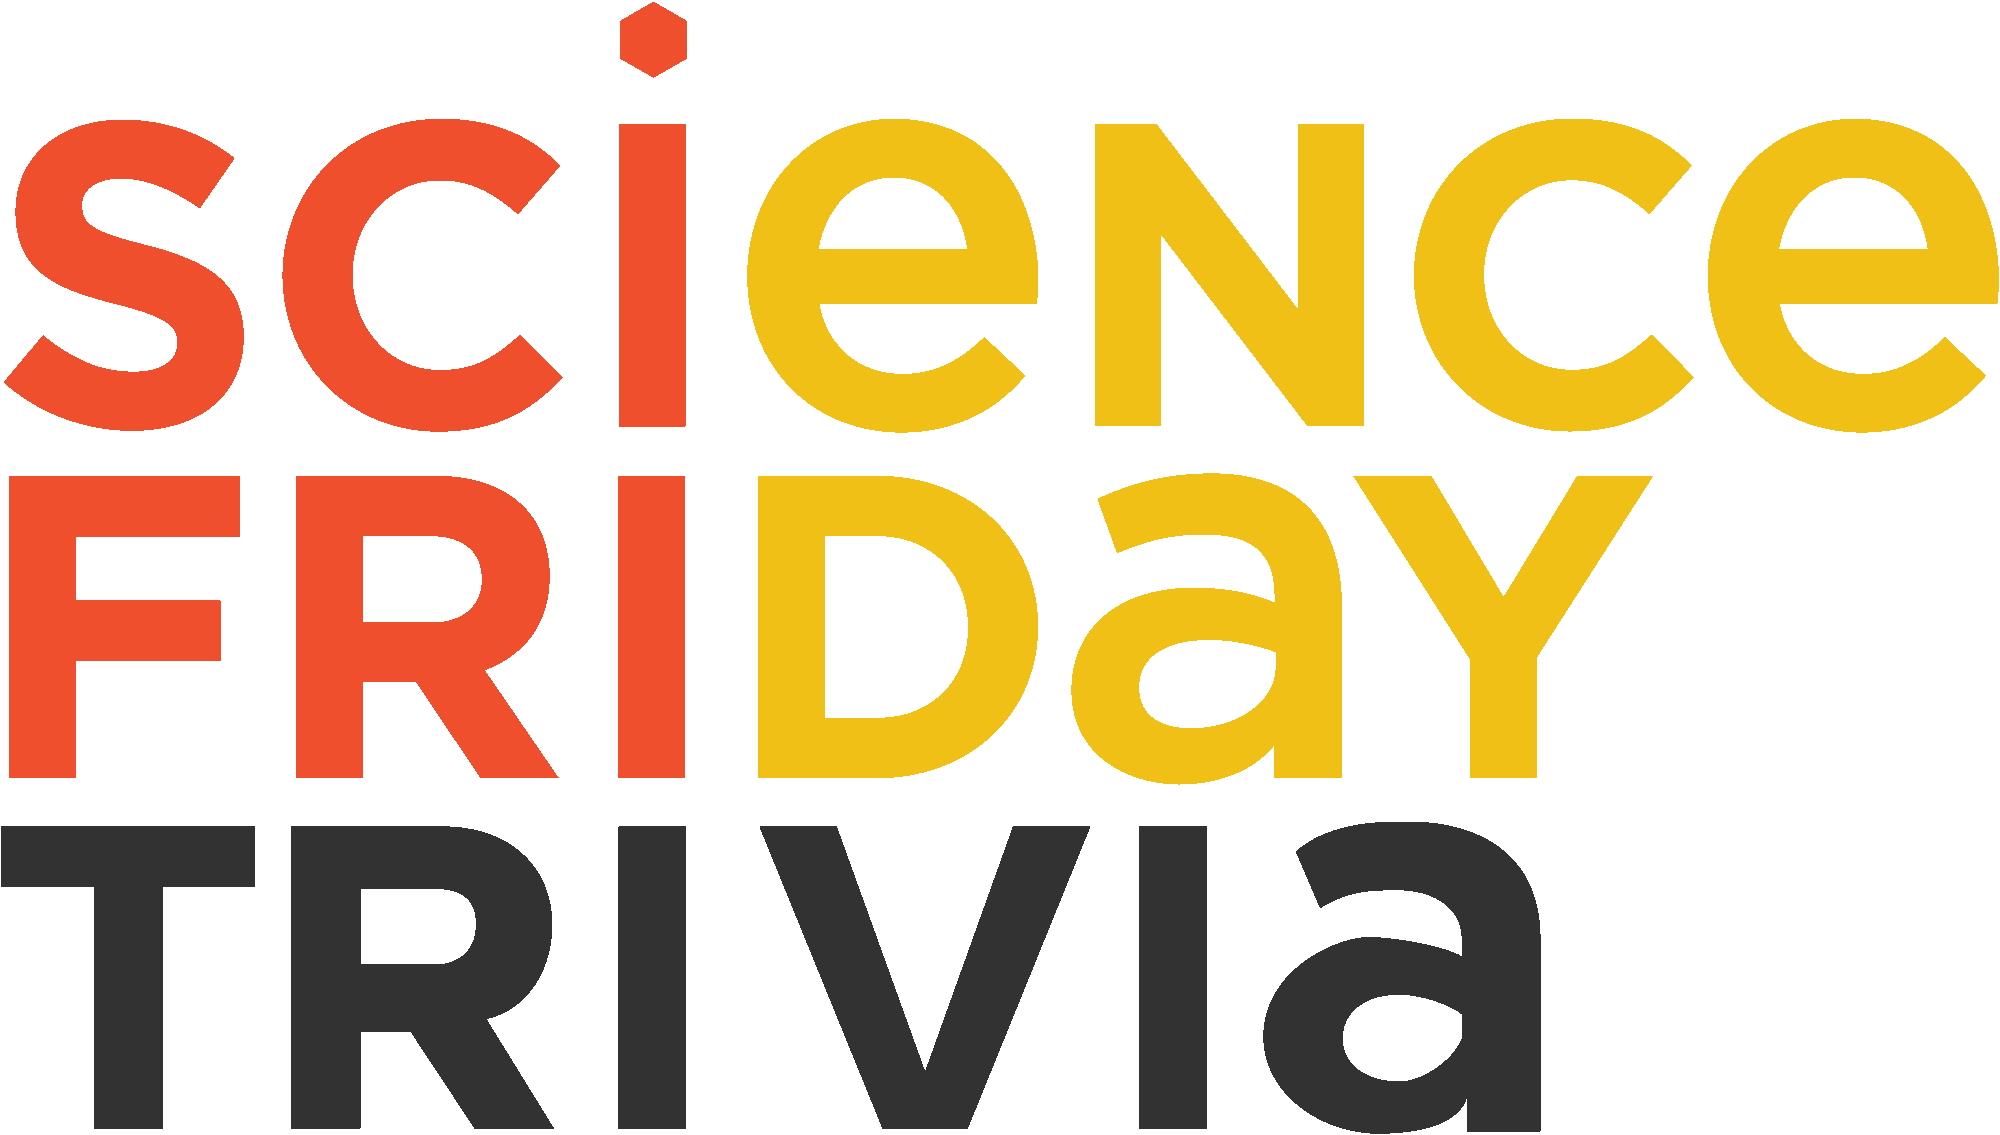 logo that says science friday trivia